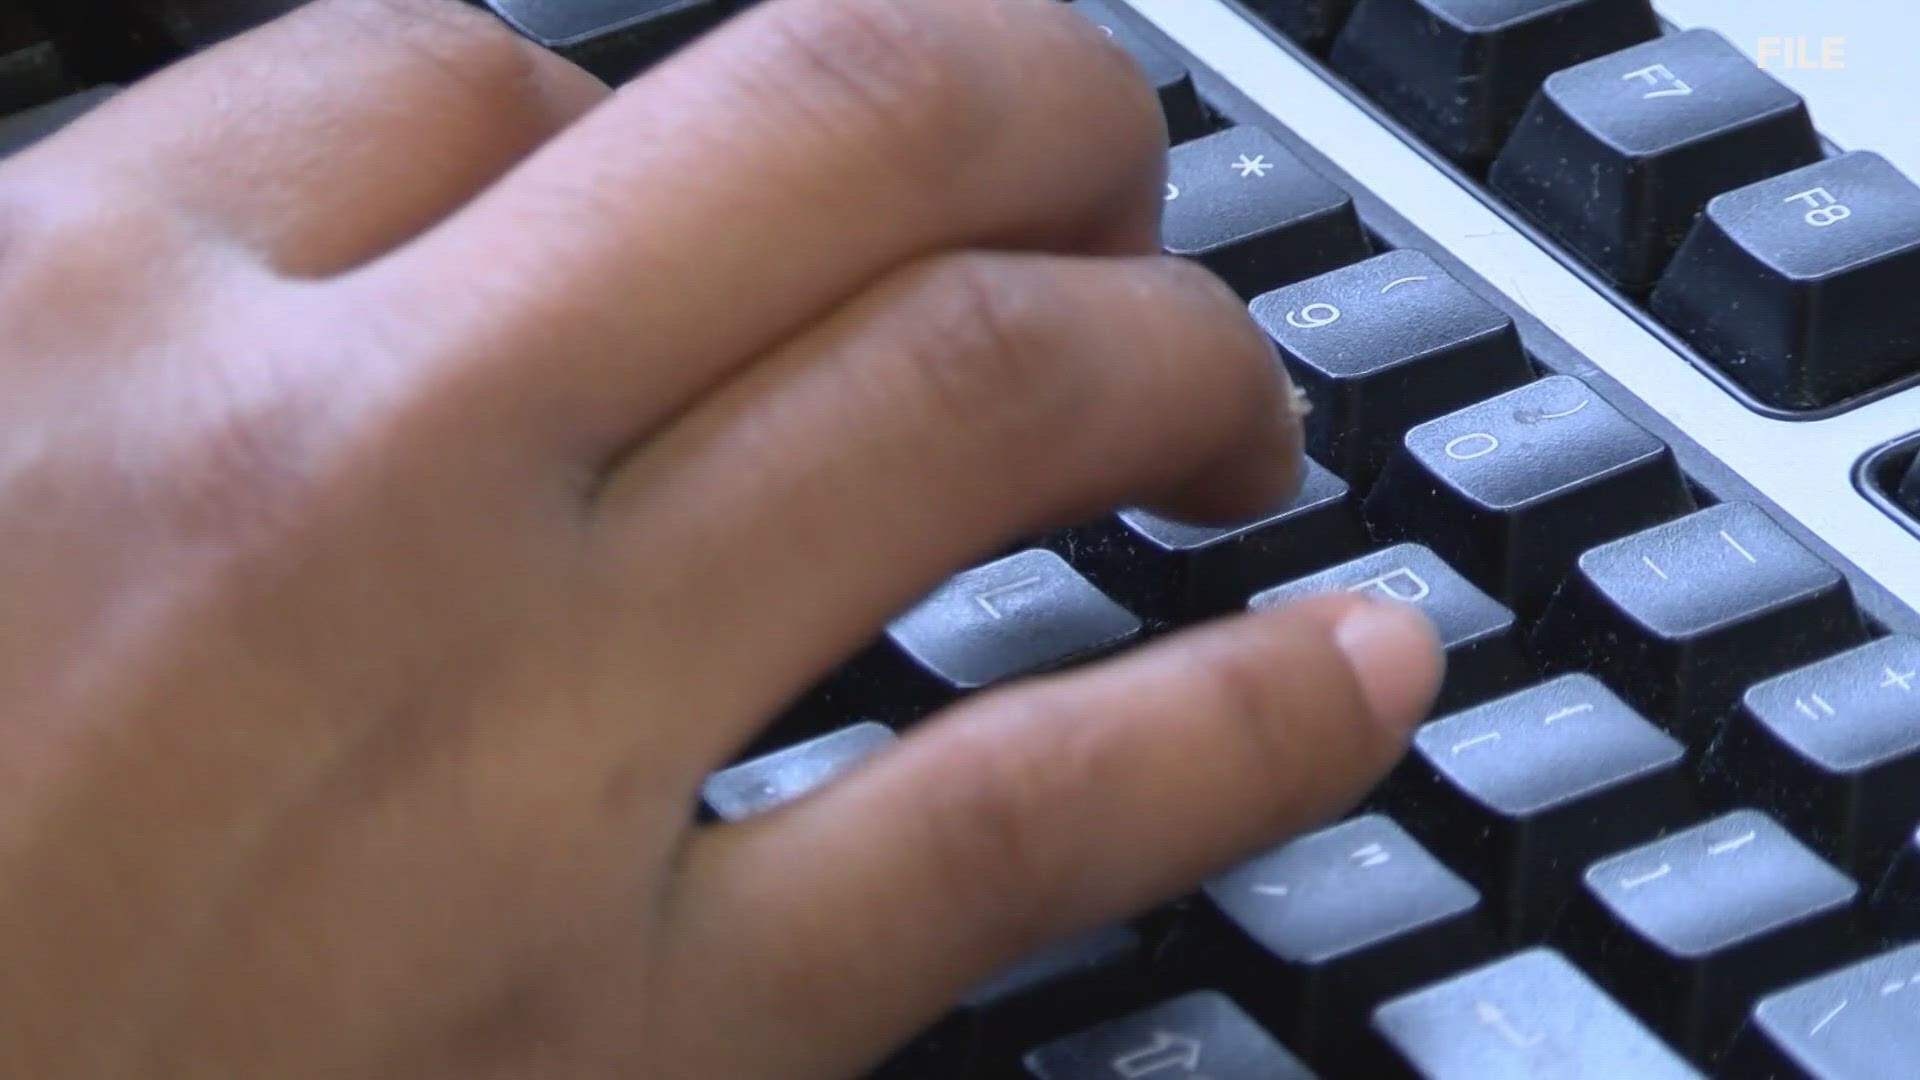 A collaboration between the Urban League and area tech companies is about making technology available to all. They'll launch a new community help desk Wednesday.